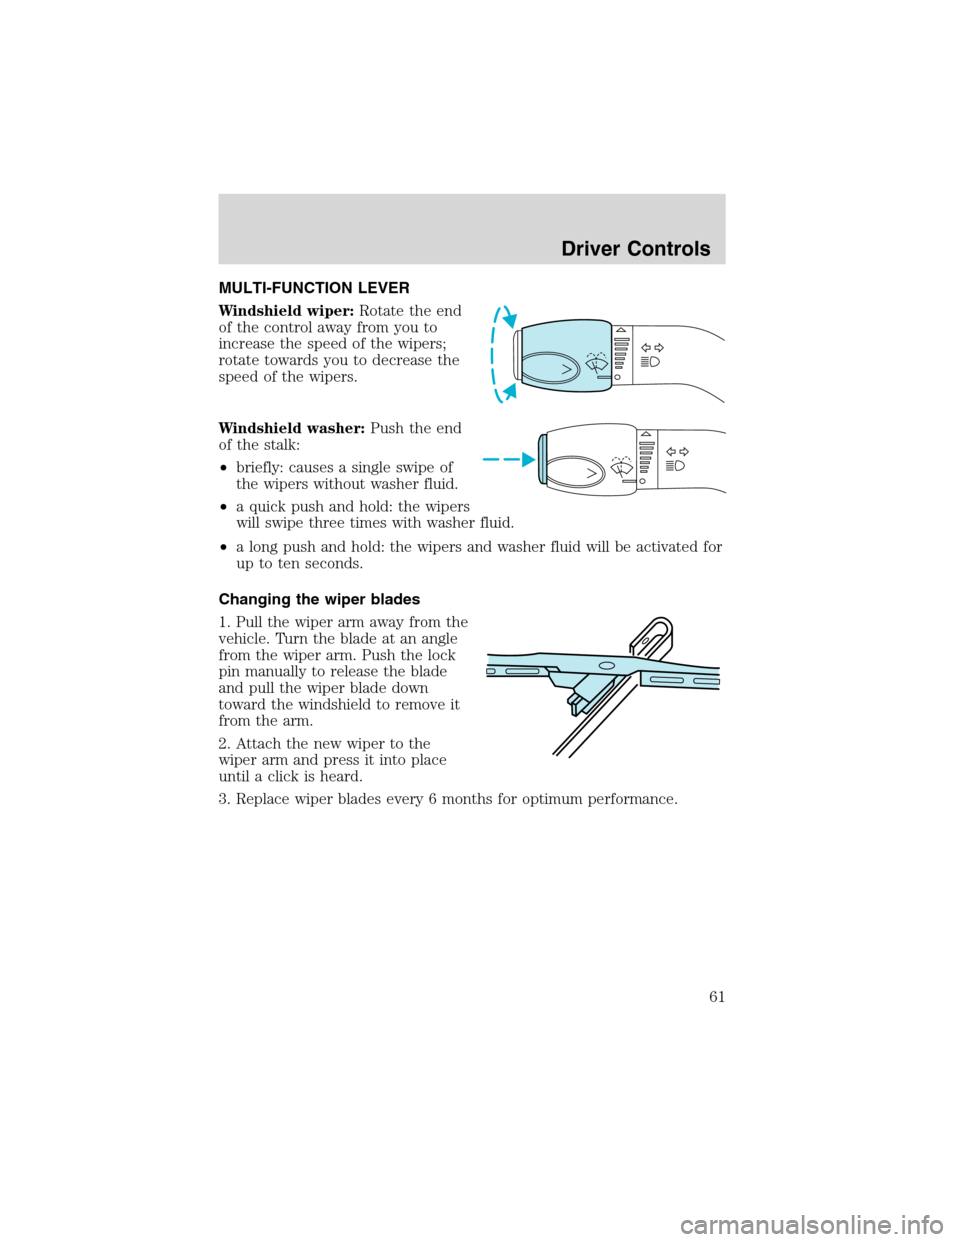 FORD E SERIES 2003 4.G Owners Manual MULTI-FUNCTION LEVER
Windshield wiper:Rotate the end
of the control away from you to
increase the speed of the wipers;
rotate towards you to decrease the
speed of the wipers.
Windshield washer:Push th